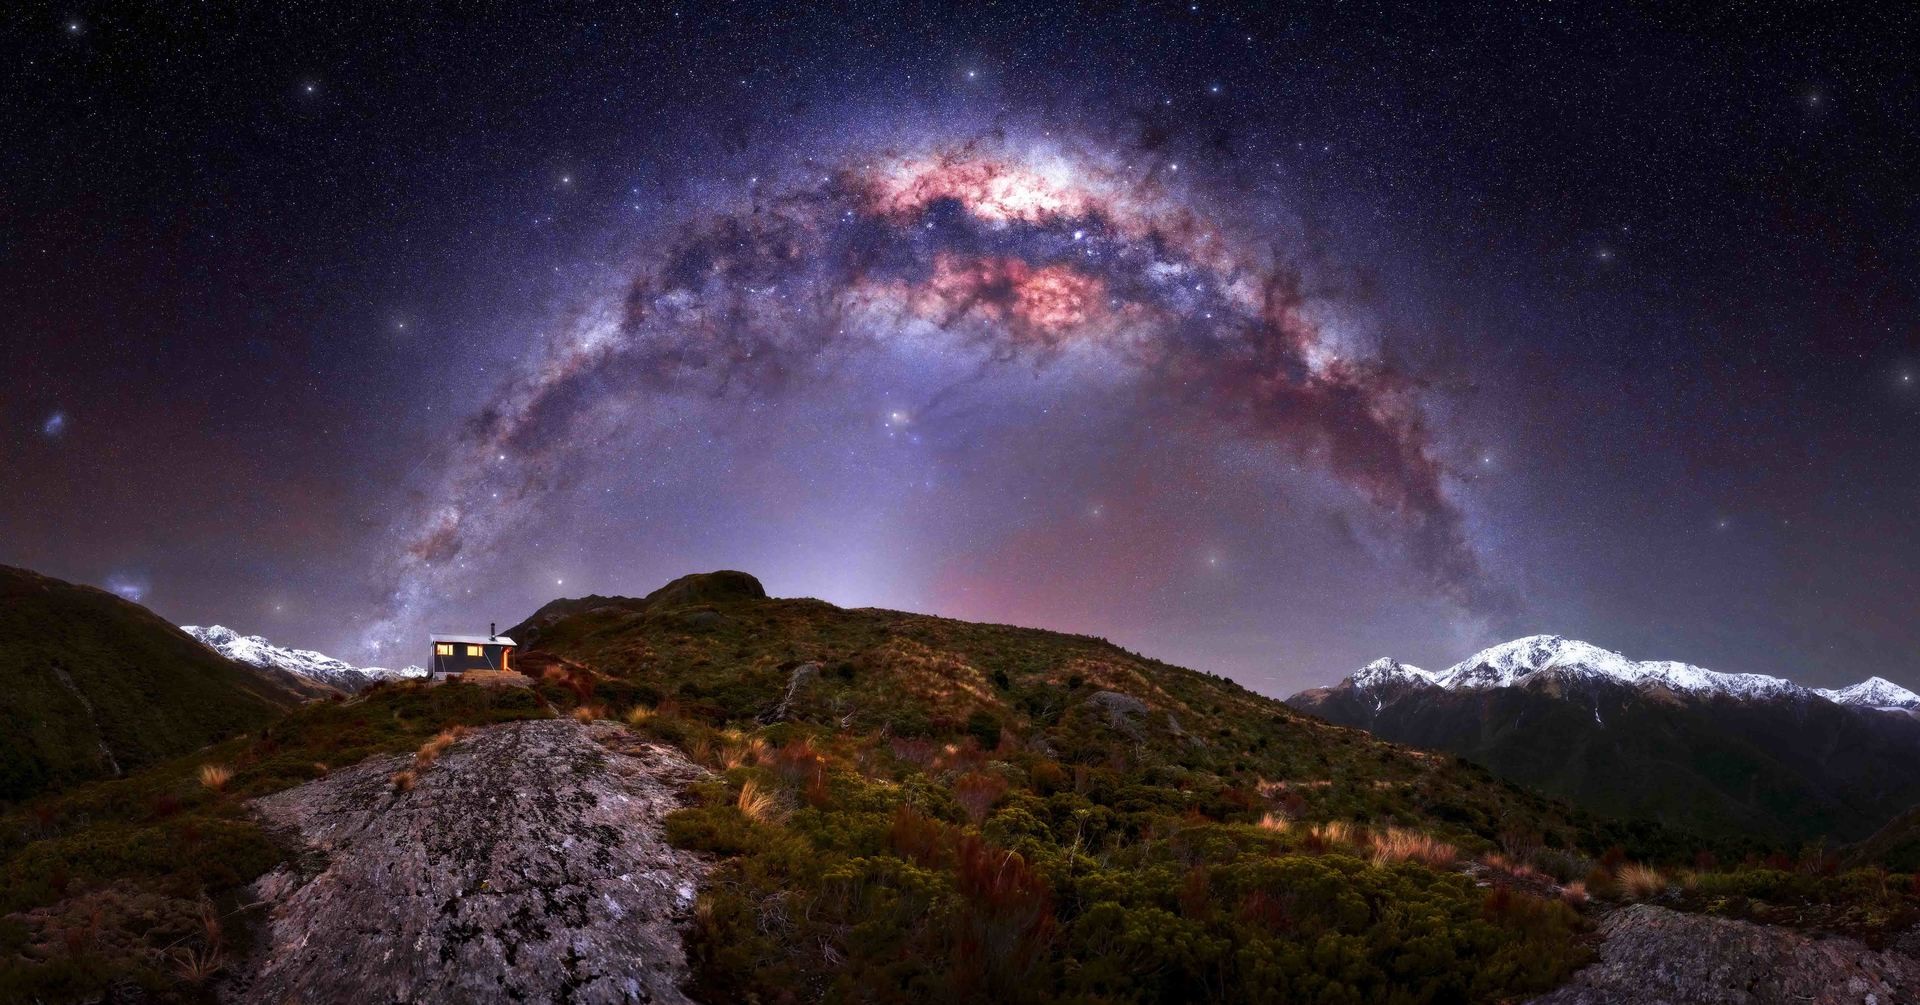 Magic of the starry sky: Published the best images of the Milky Way